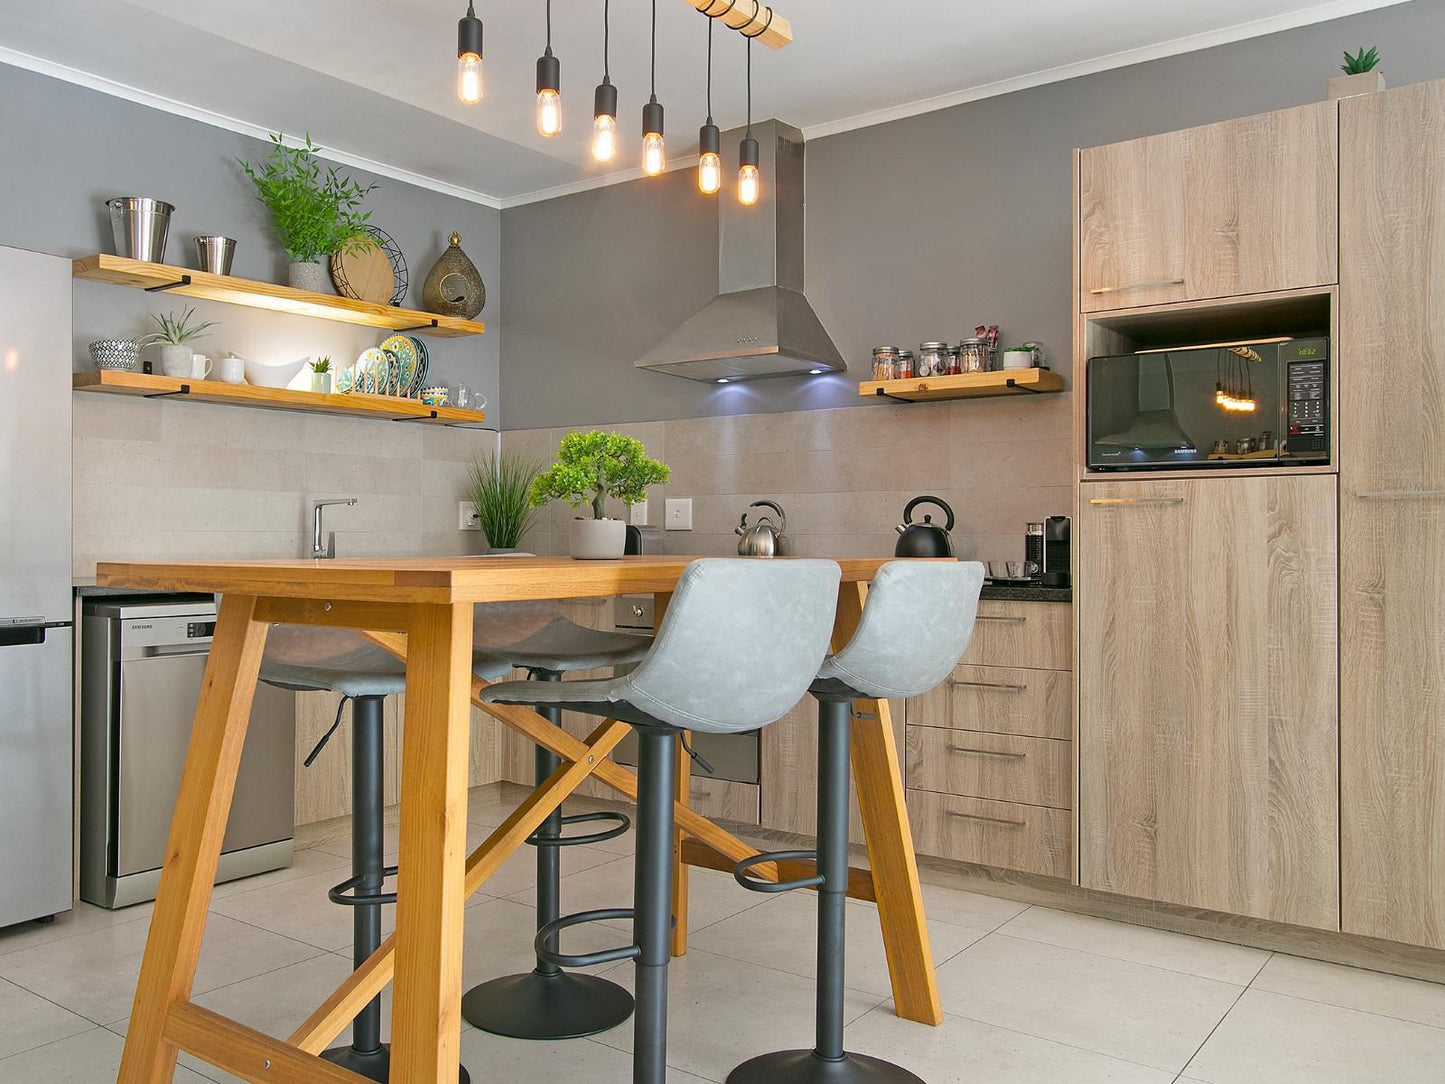 Luxury 2 Bedroom Apartment In Century City Century City Cape Town Western Cape South Africa Kitchen